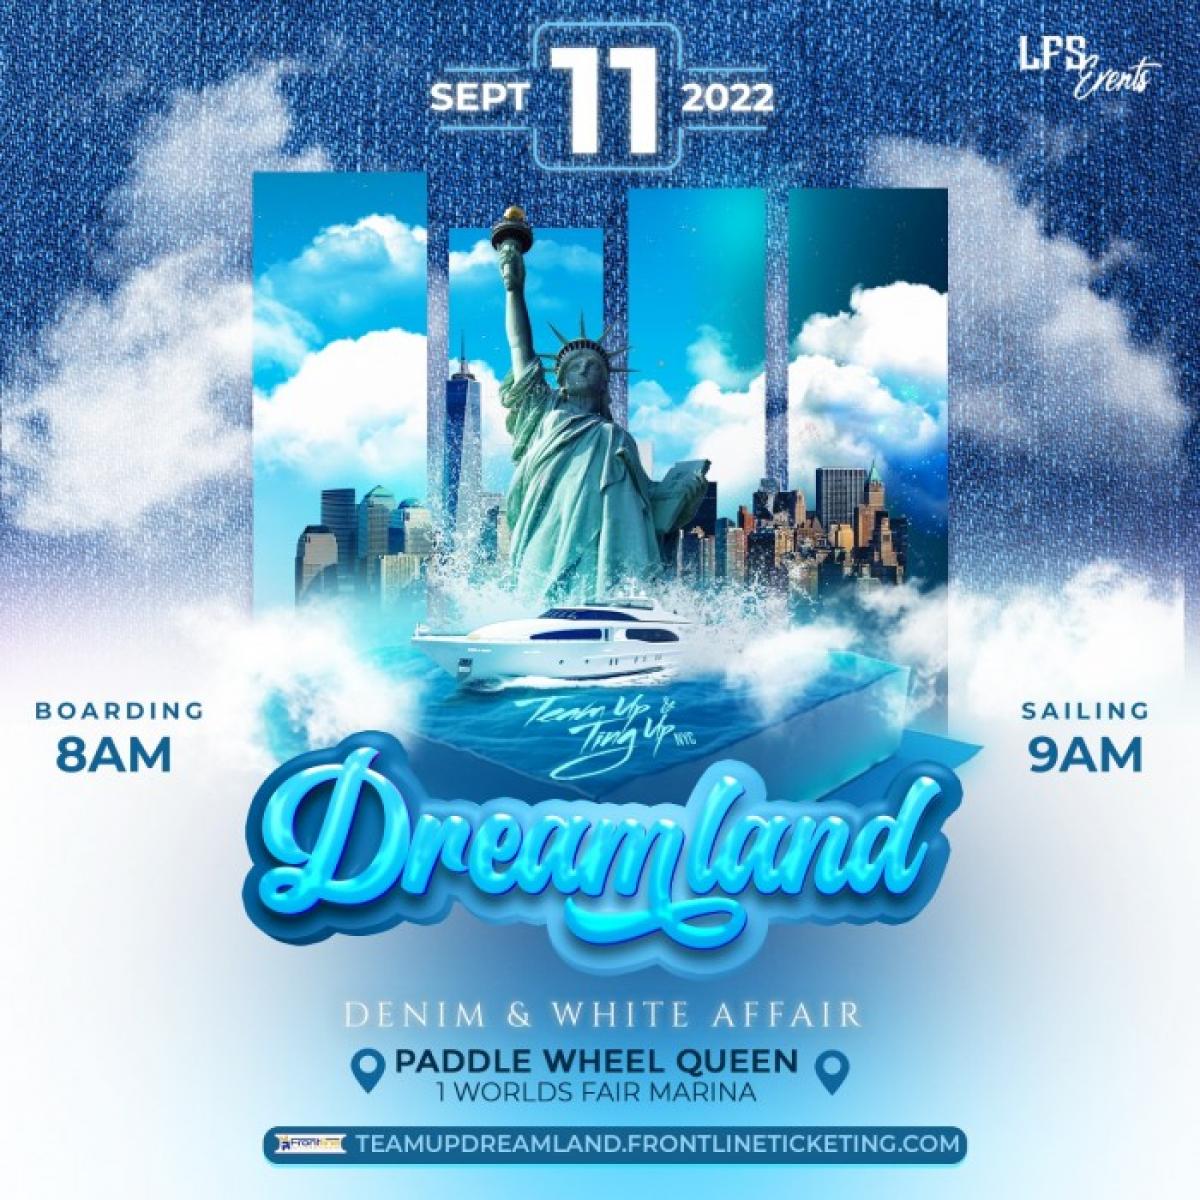 Dreamland flyer or graphic.